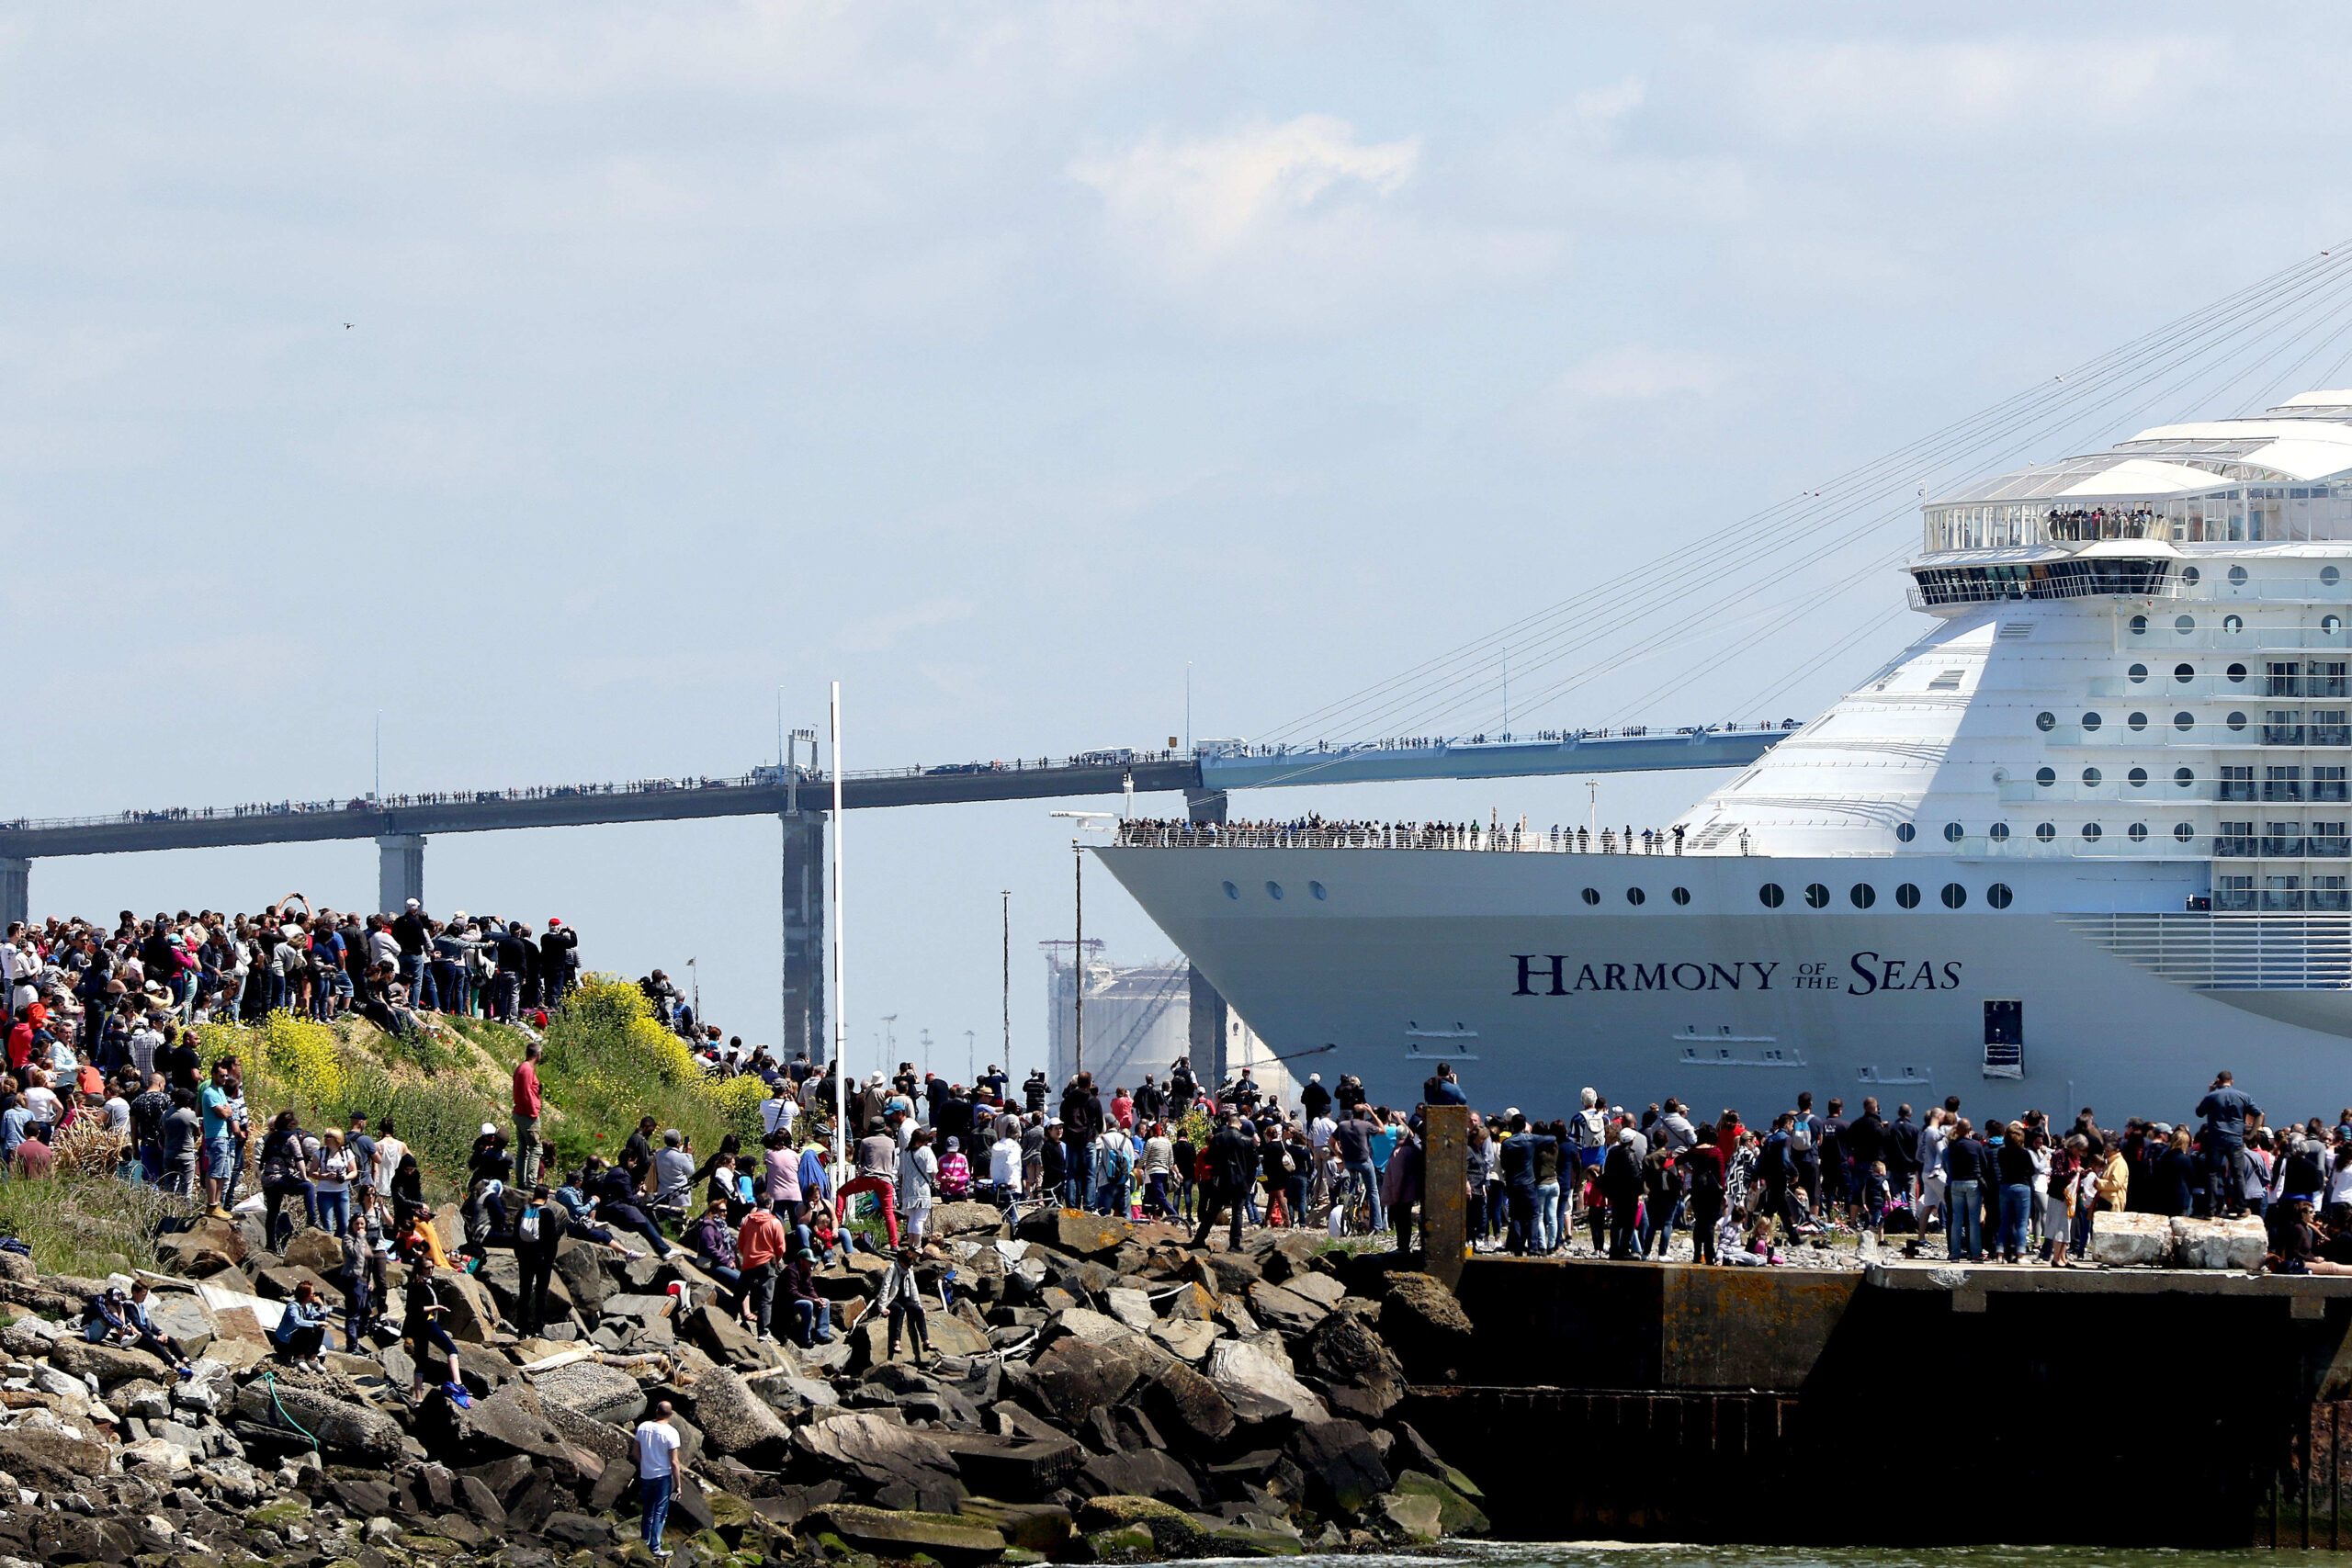 Massive crowd sees off world’s largest cruise ship in France